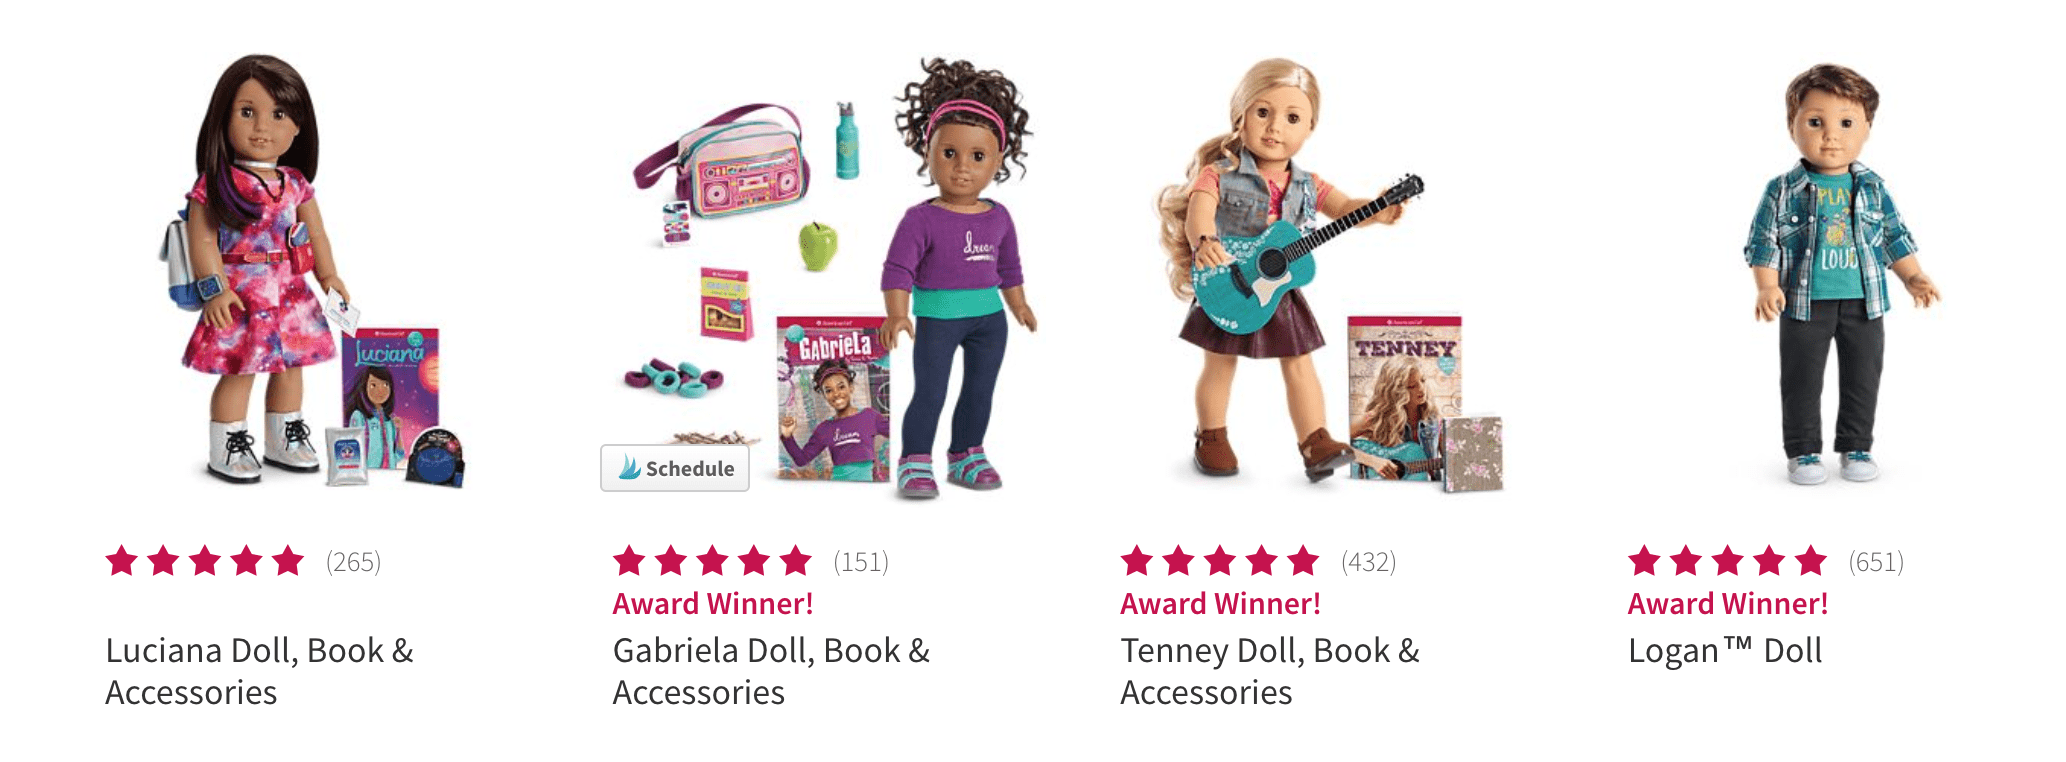 Give Good, Get Good: An American Girl Doll Giveaway